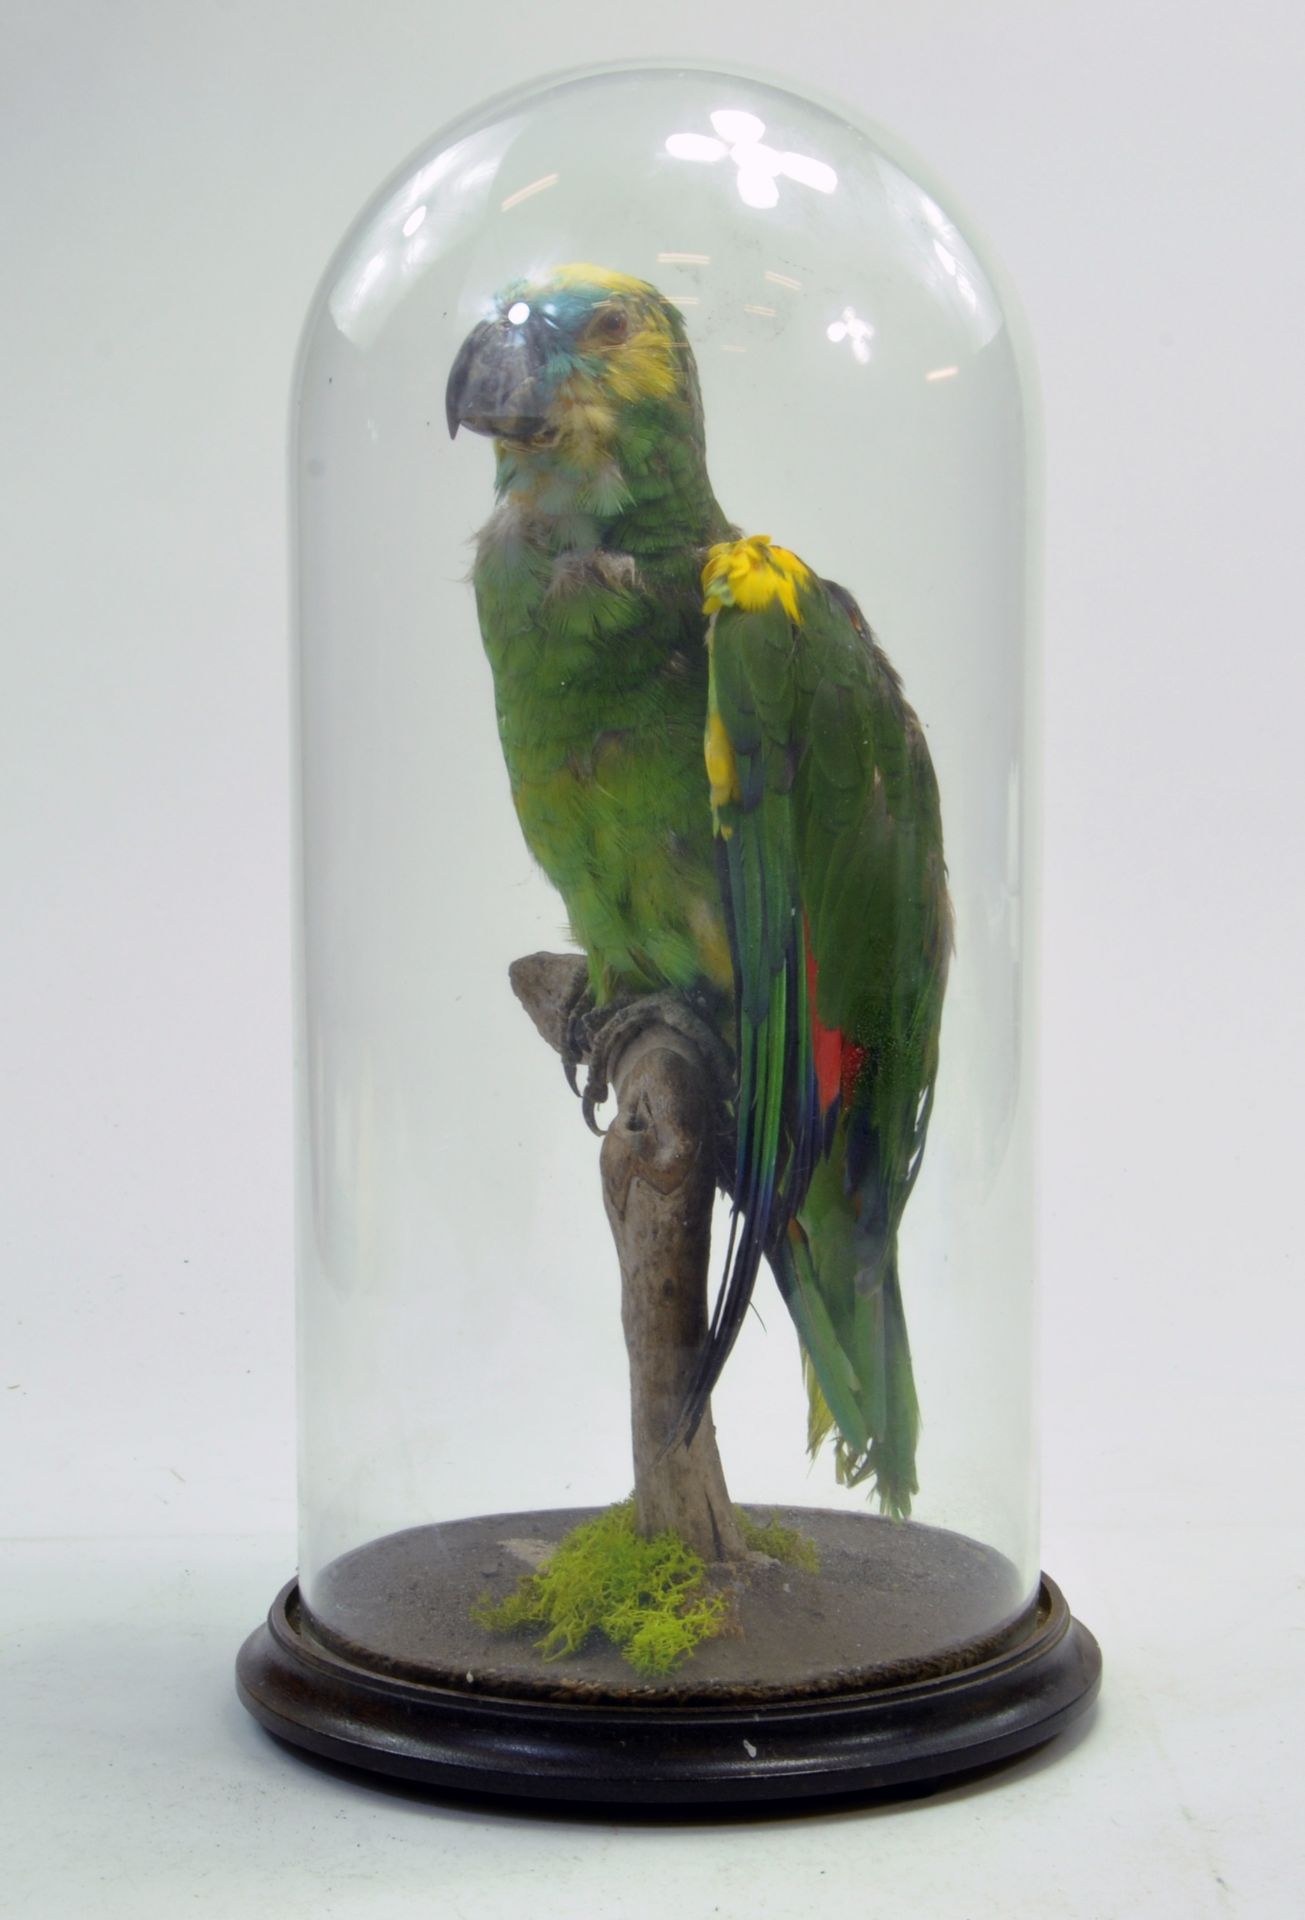 Taxidermy: A example of a parrot housed in an early 20th century glass Globe with Plinth.